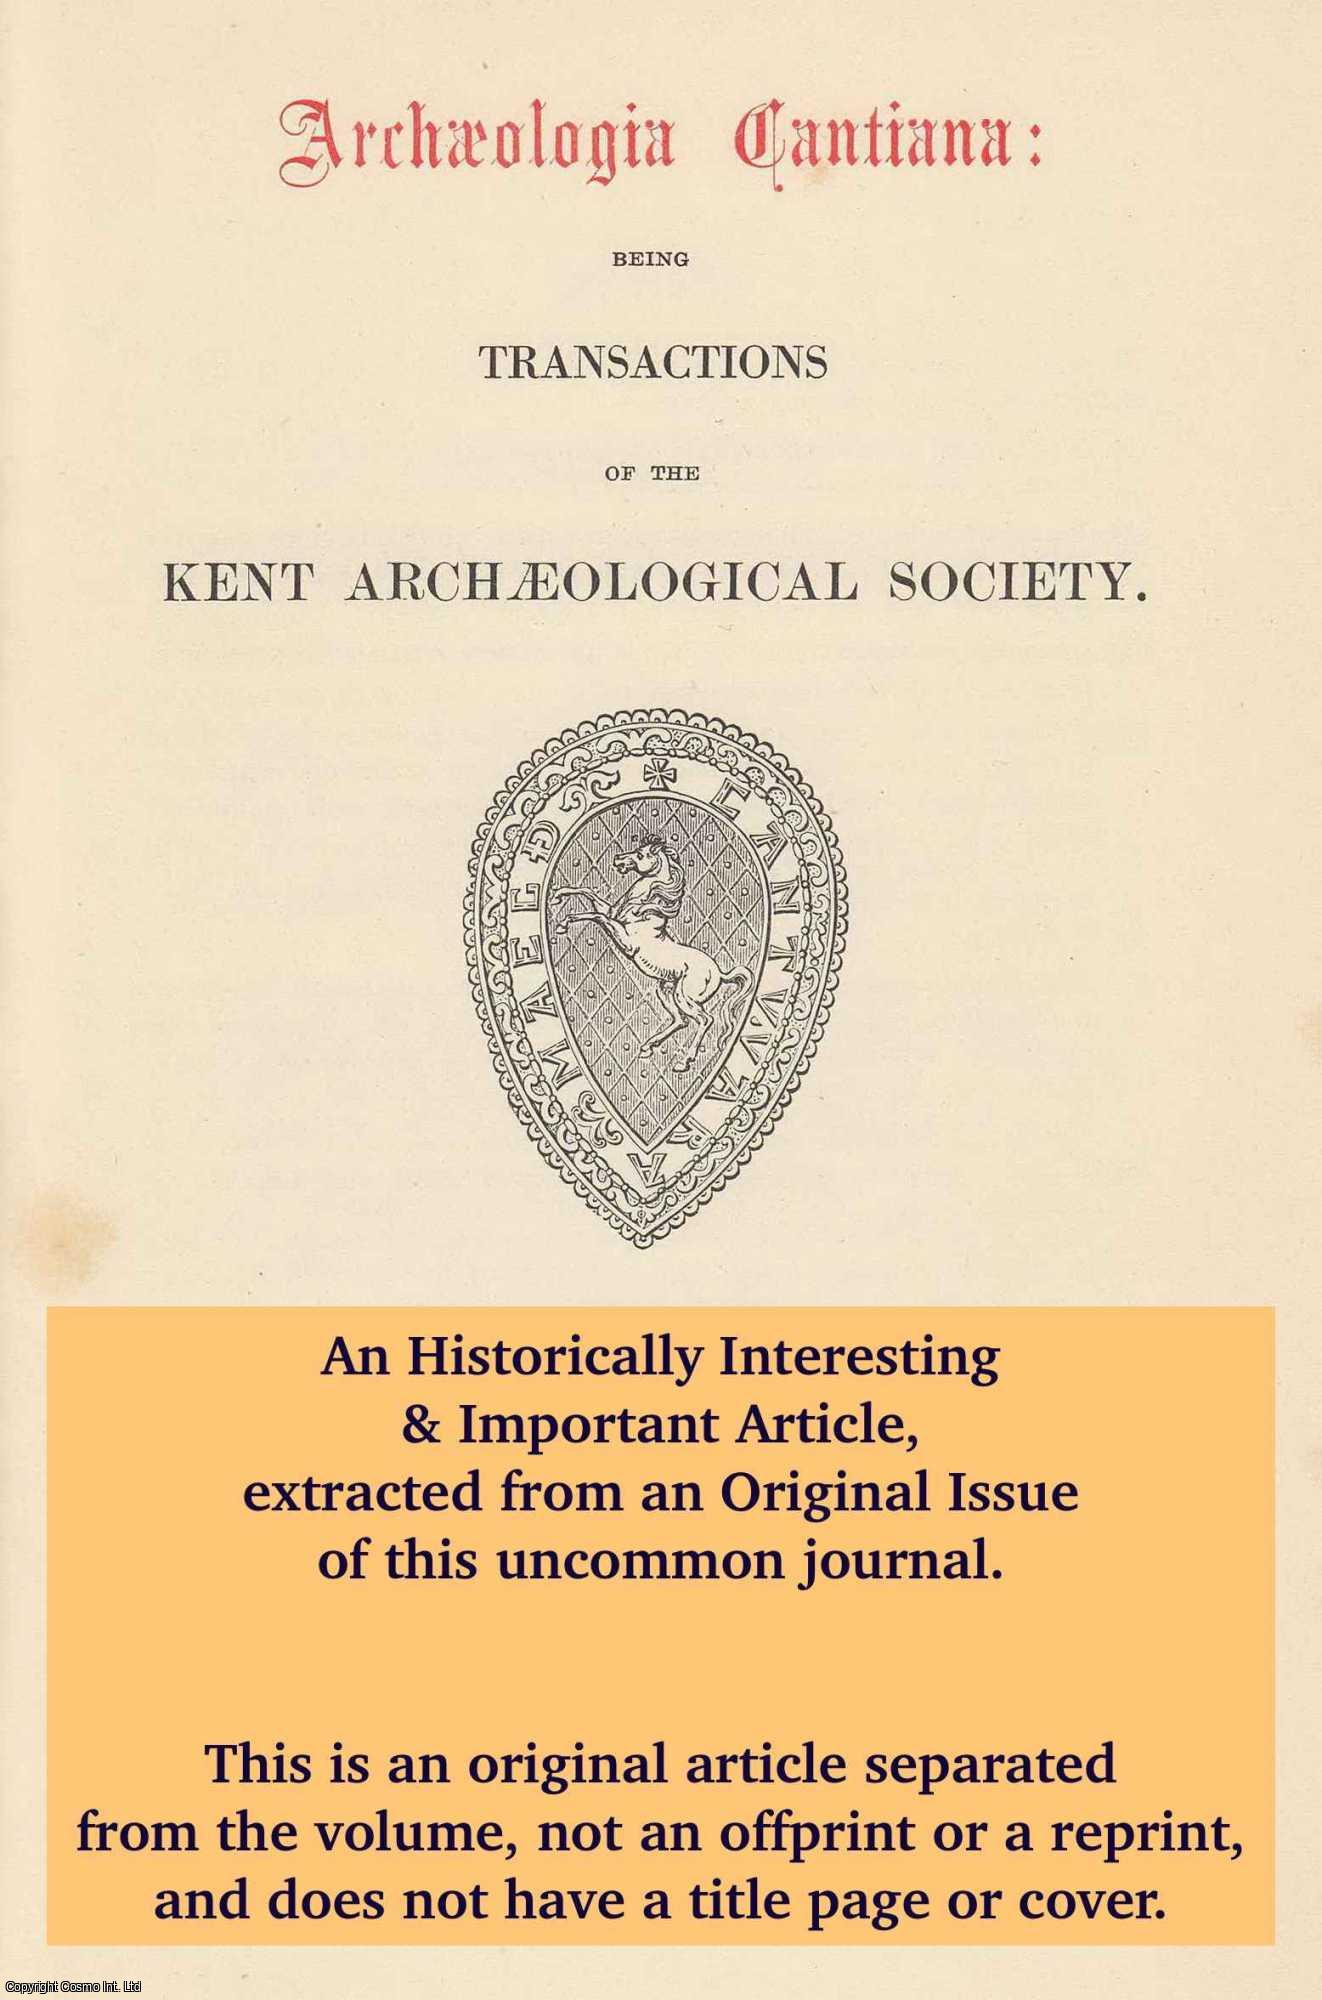 William Urry - A Circular Roman Temple Discovered in the Late Seventeenth Century at Canterbury An original article from The Archaeologia Cantiana: Transactions of The Kent Archaeological Society, 1979.